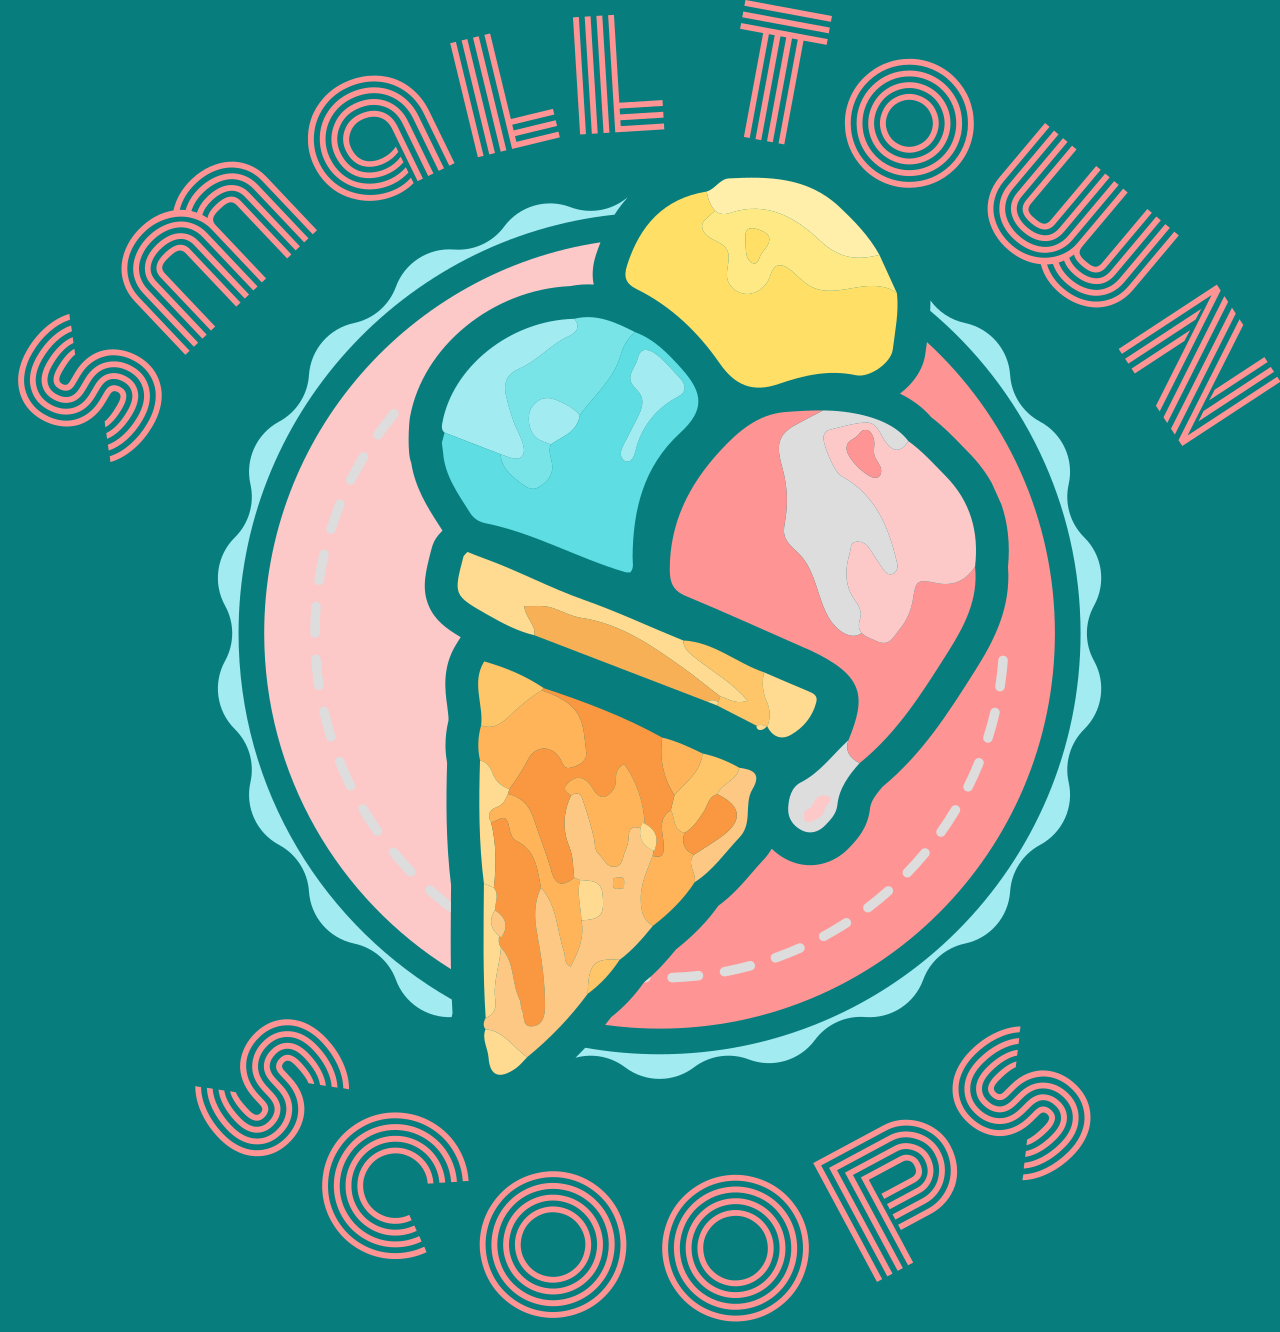 Small Town Scoops's logo